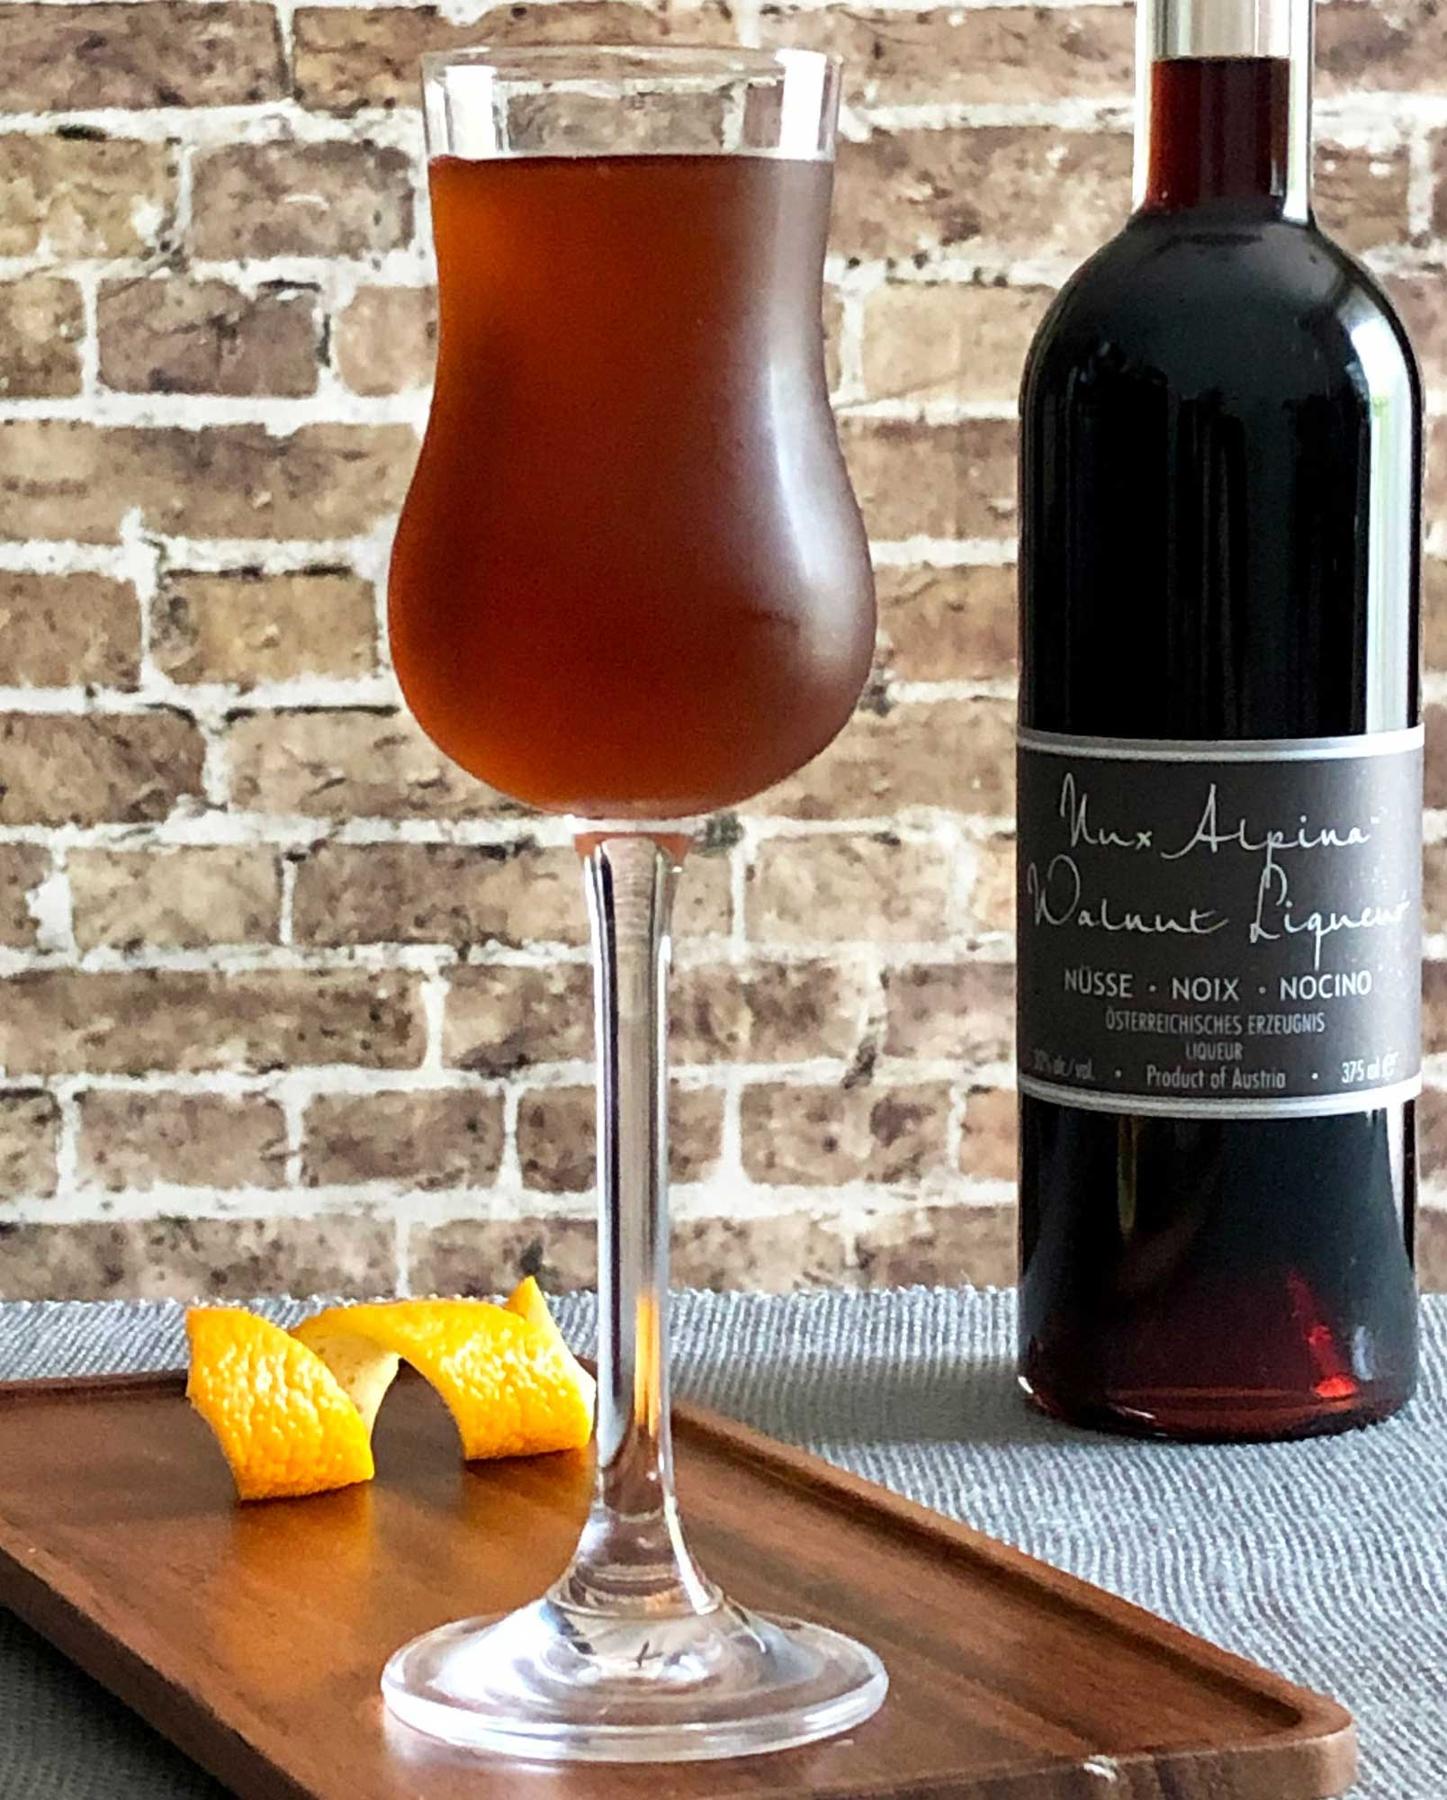 An example of the Mississauga Cocktail, the mixed drink (drink) featuring rye whiskey, Nux Alpina Walnut Liqueur, simple syrup, Angostura bitters, orange bitters, and orange twist; photo by Lee Edwards